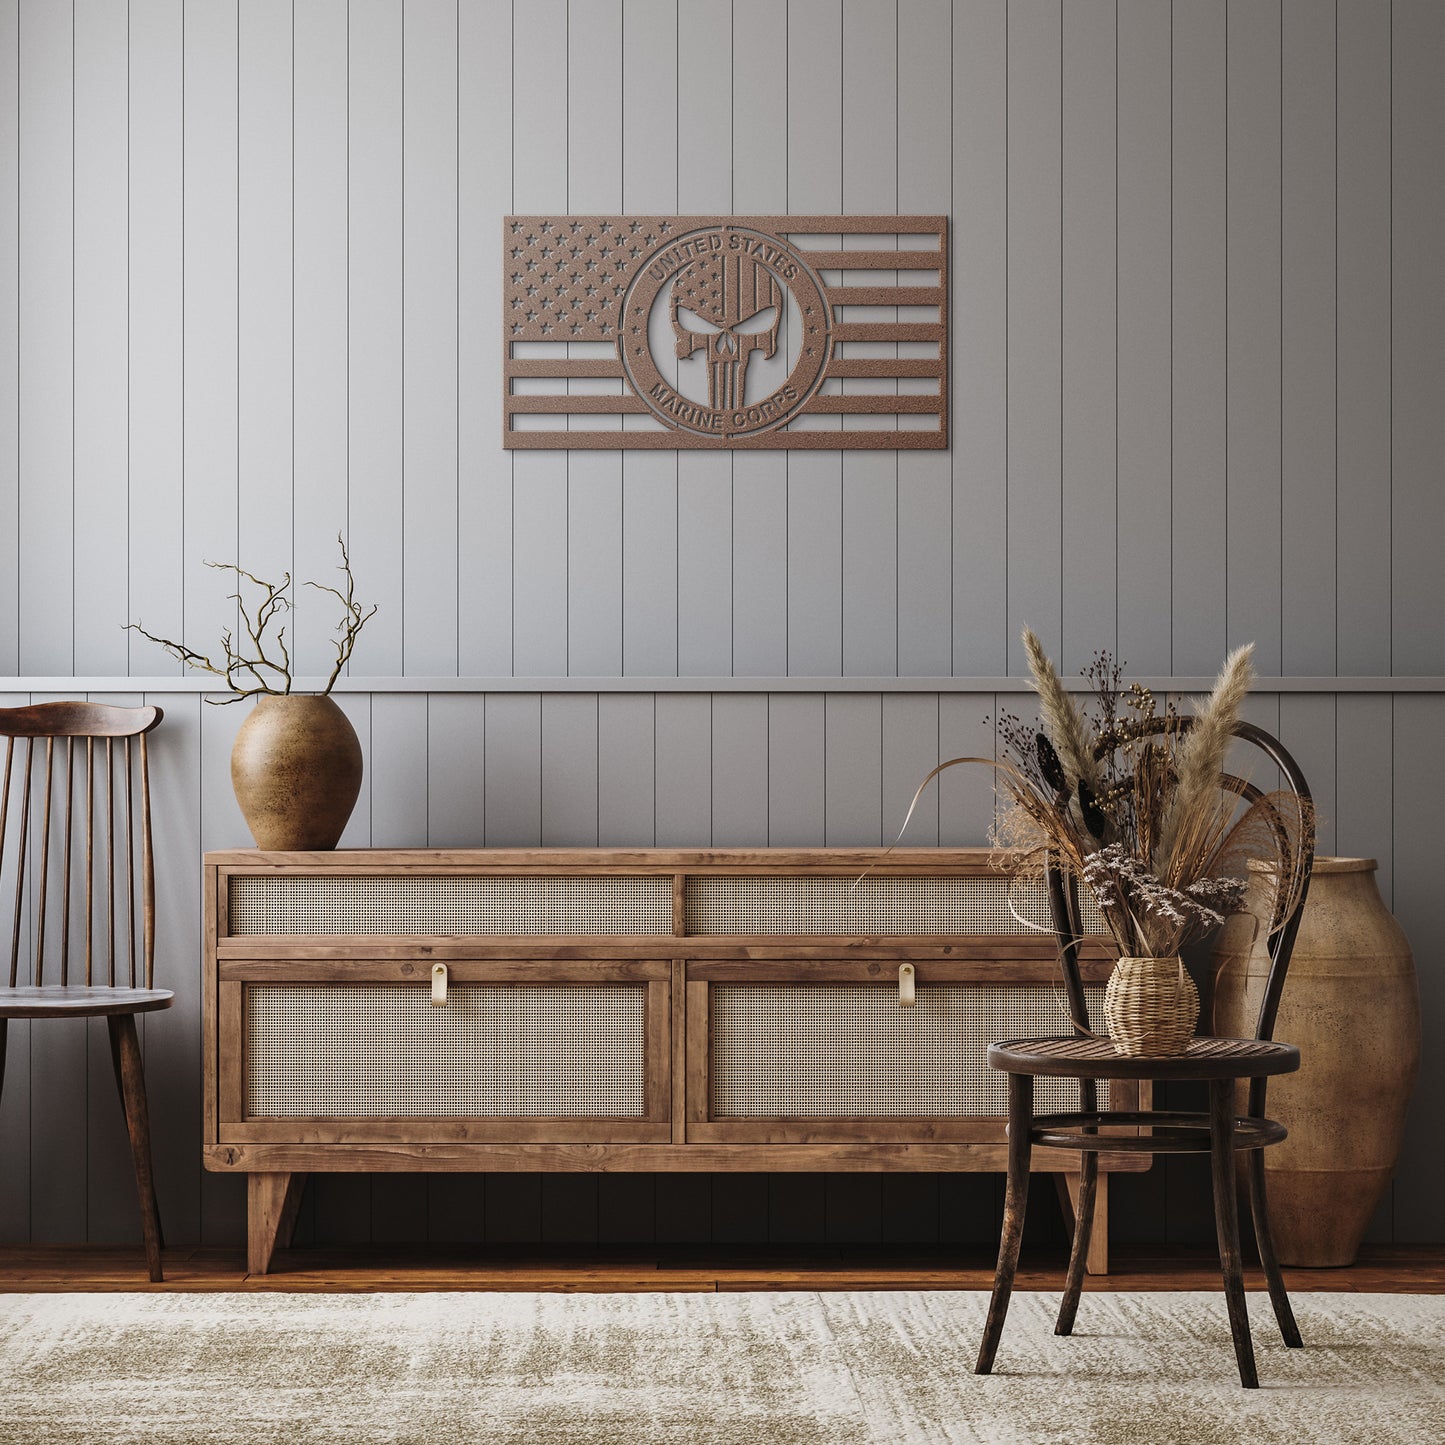 US Marines with this Punisher Skull Themed American Flag - Made in USA - Military Decor